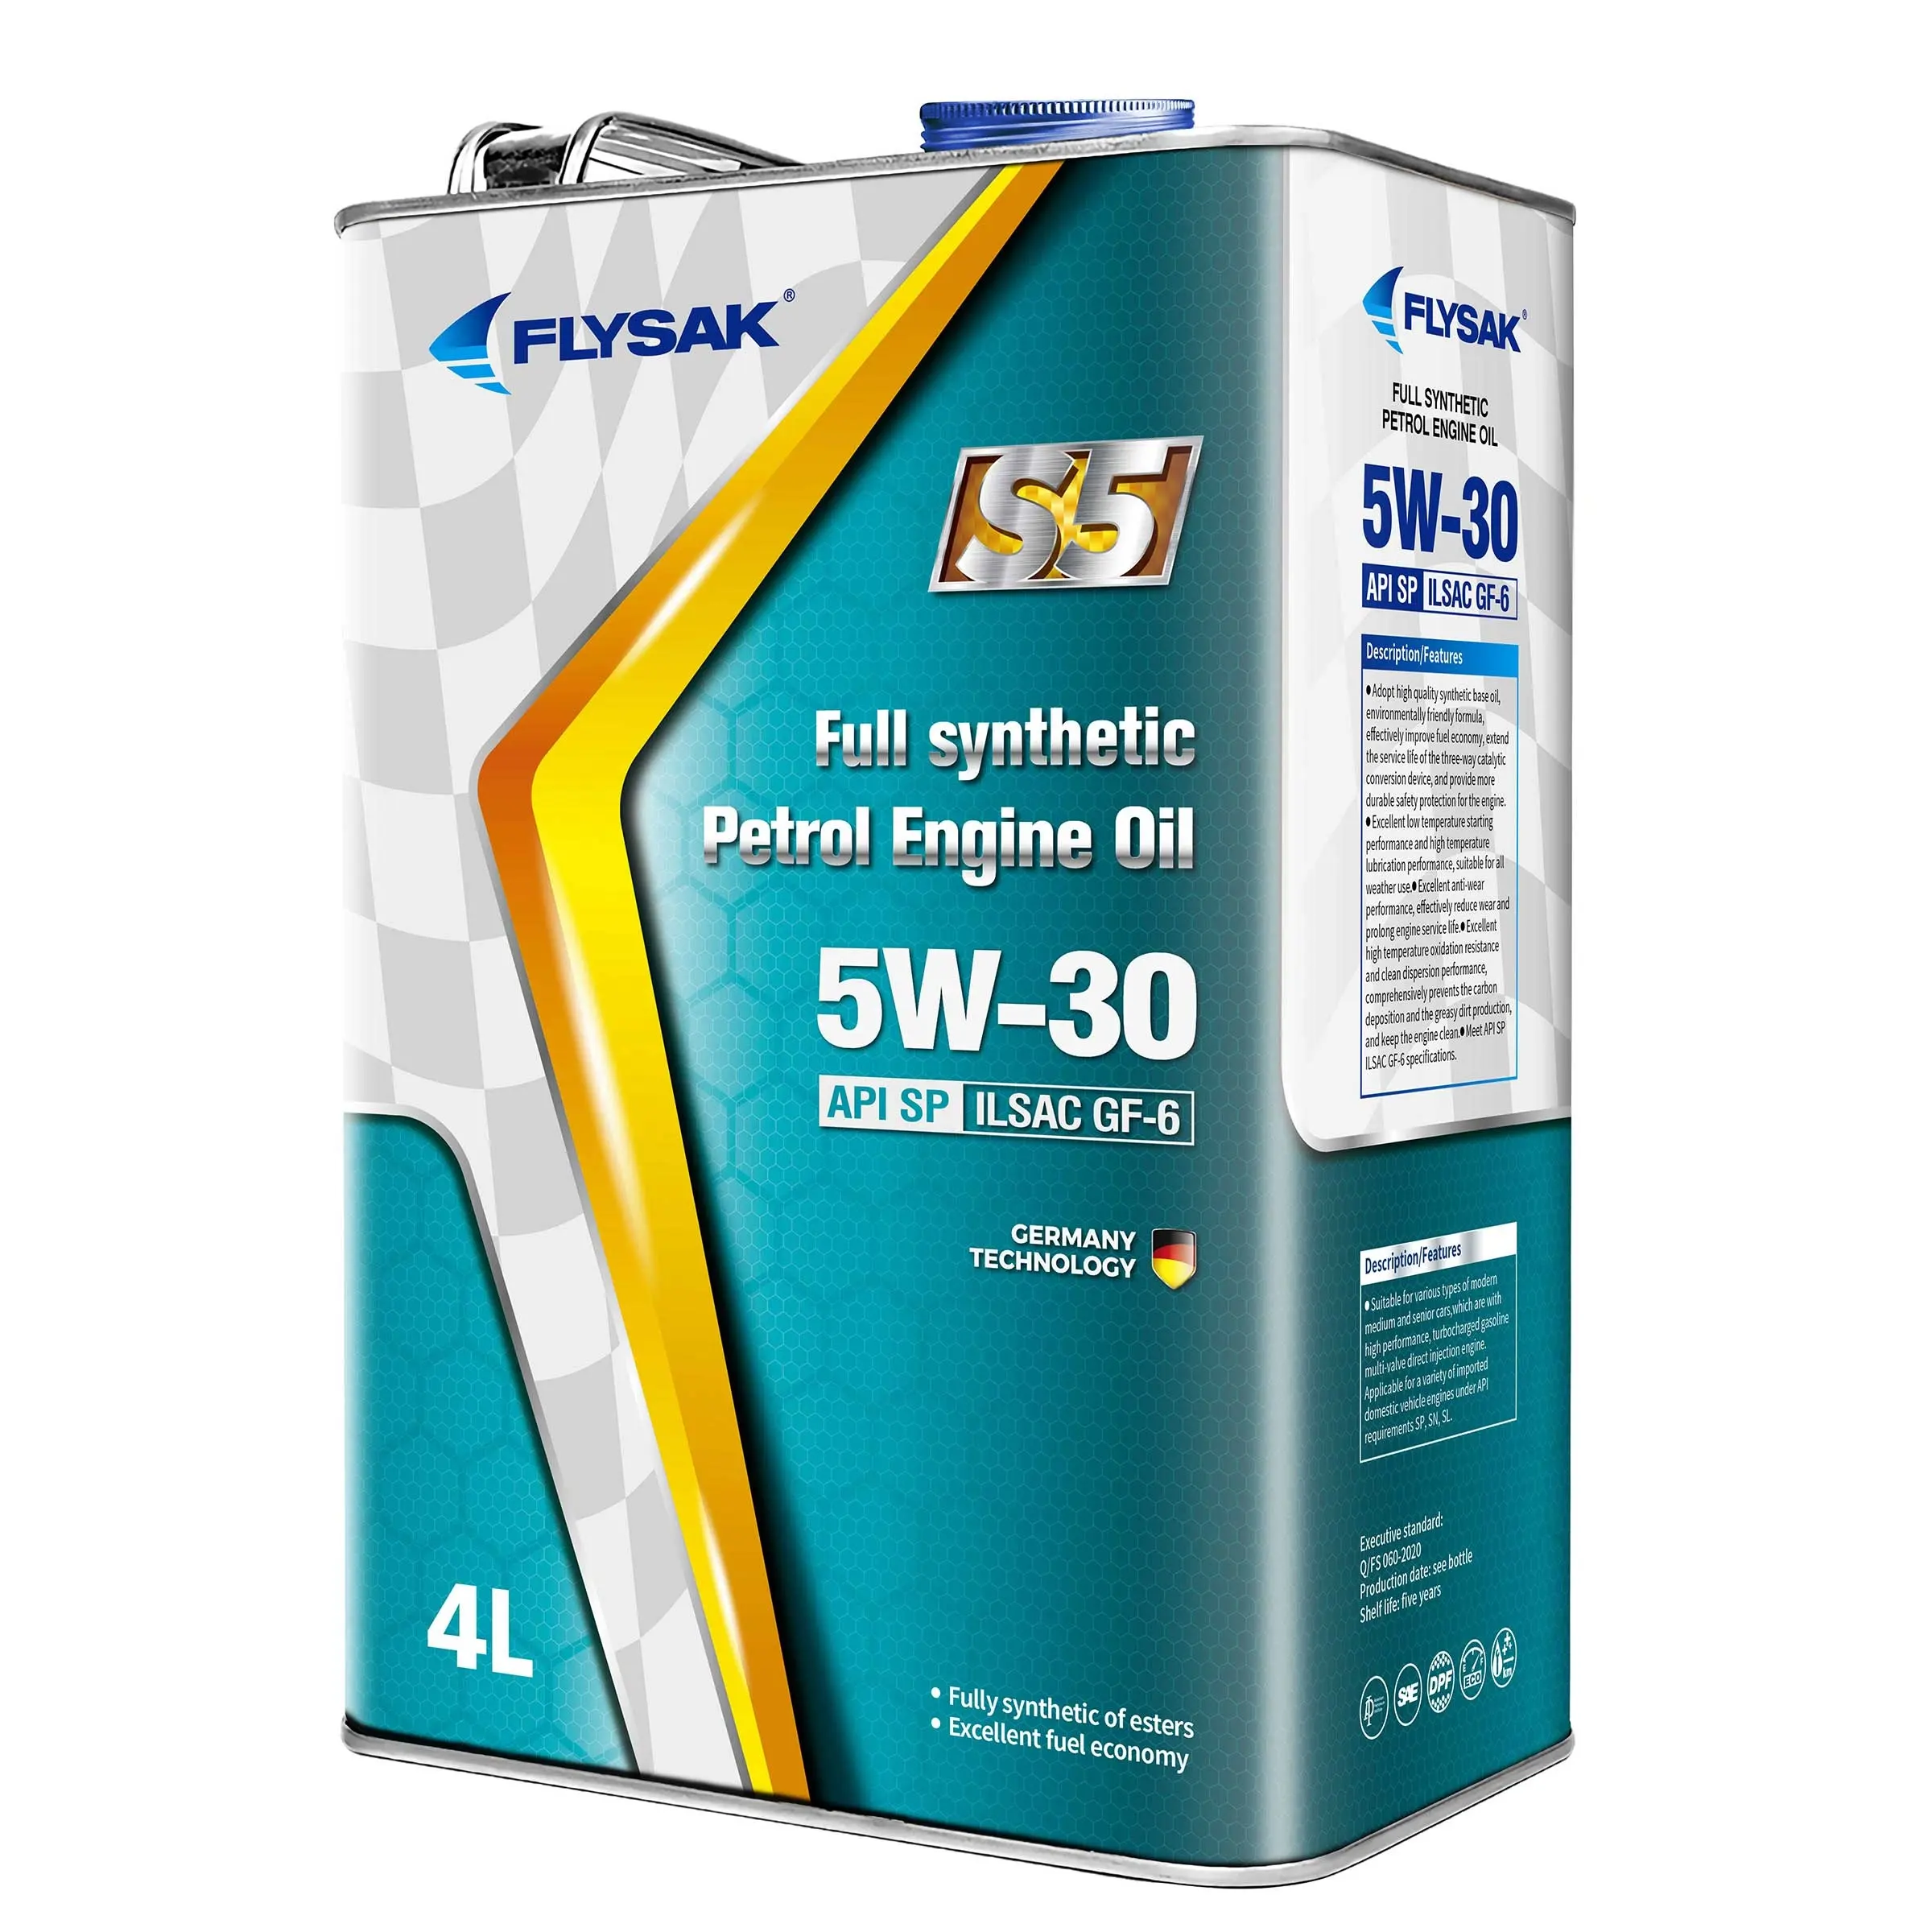 S5 Superior Quality Highly Protective Automotive Lubricant Fully Synthetic Gasoline Engine Oil SP GF6 5w30